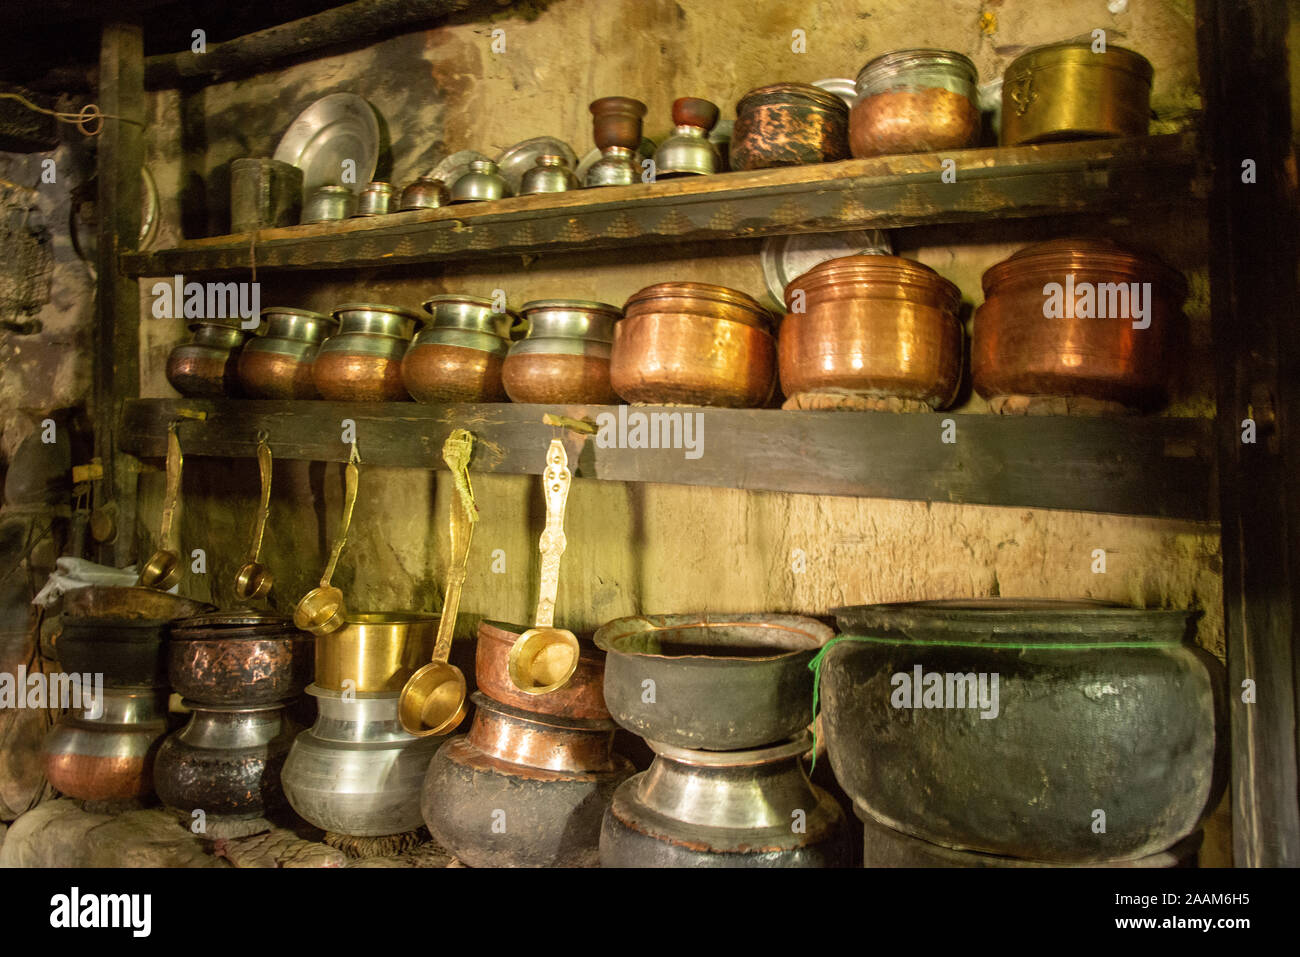 With copper to old pots what do Copper Pans: